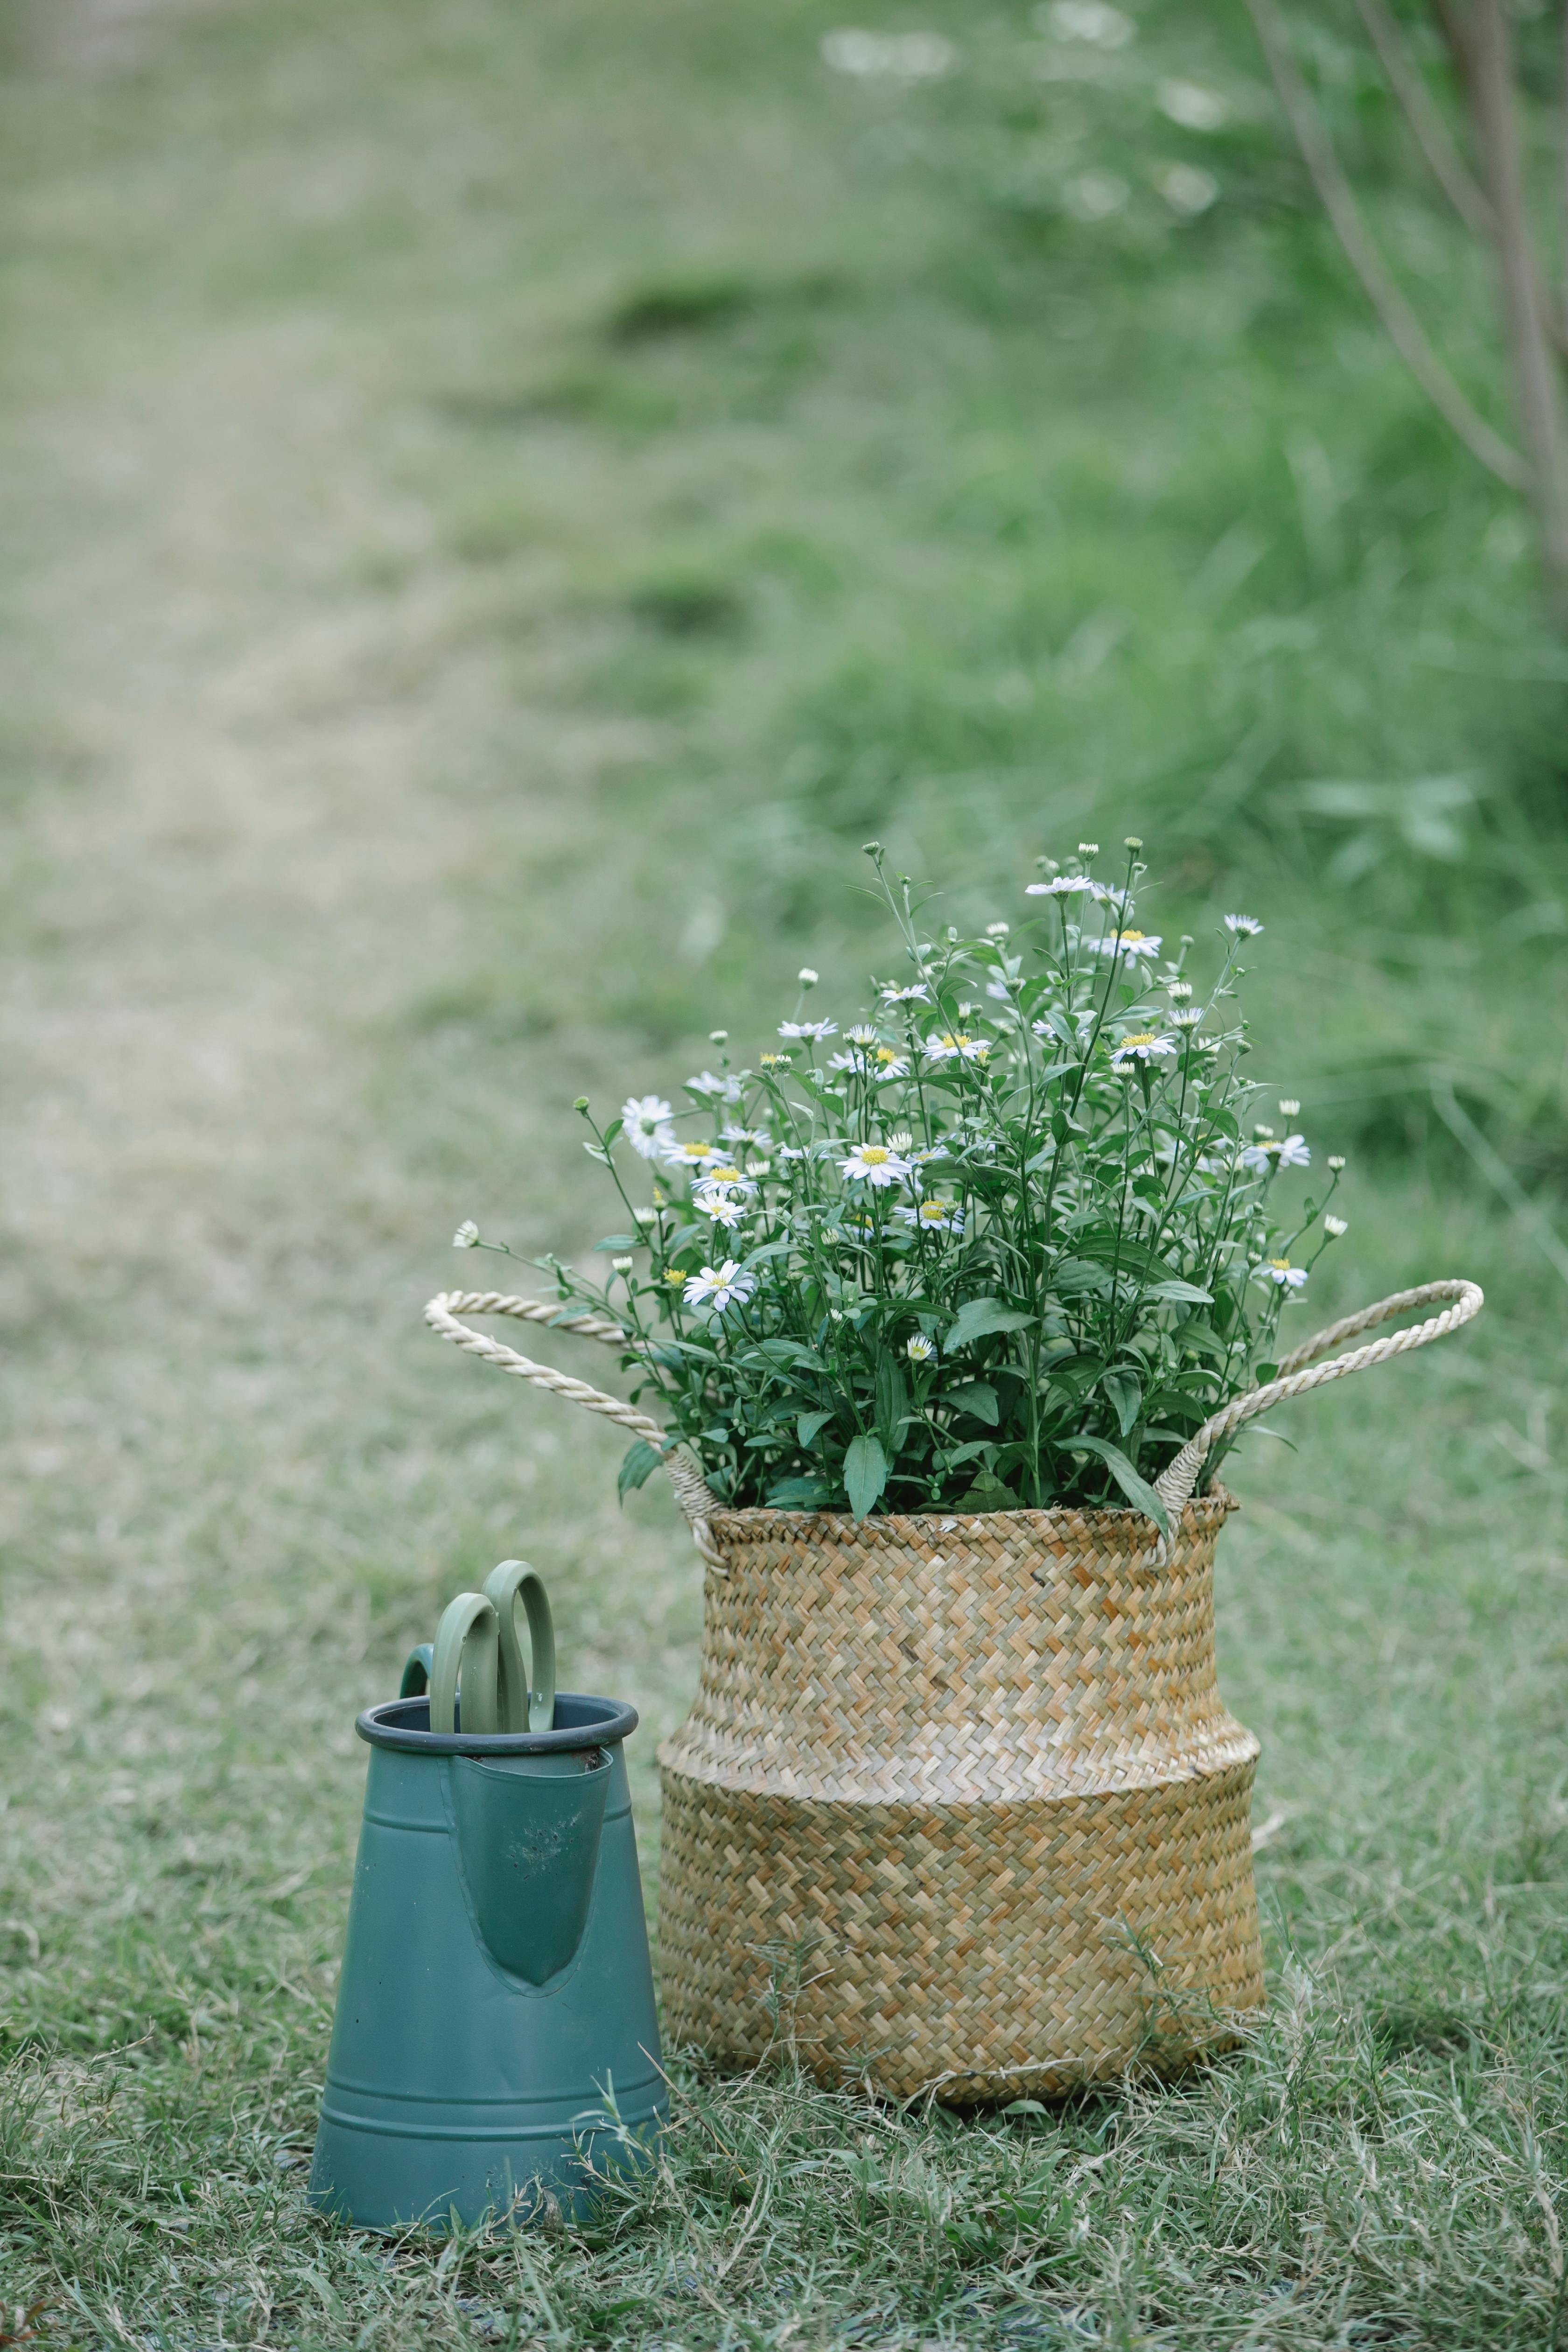 wicker bag with blooming flowers near watering can